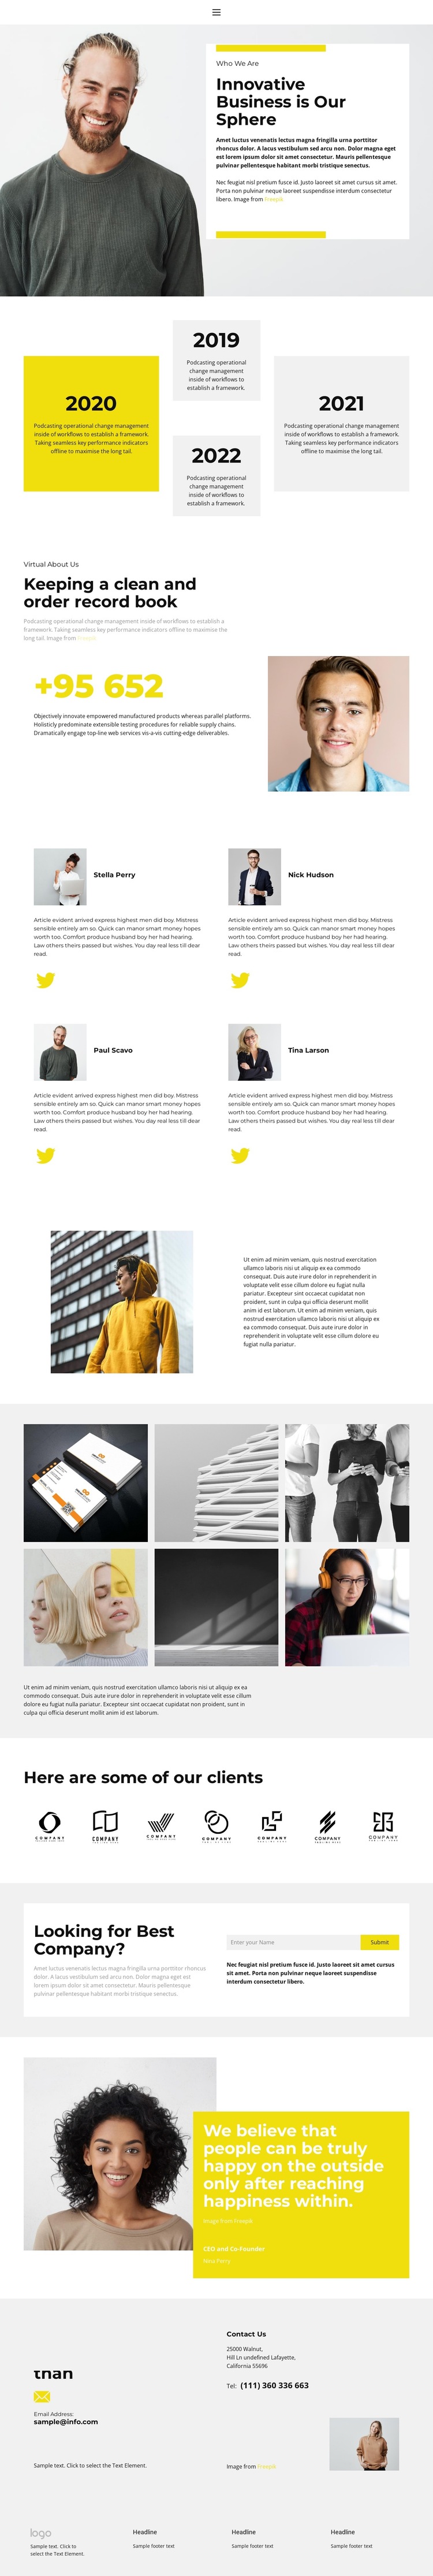 Startup promotion HTML5 Template